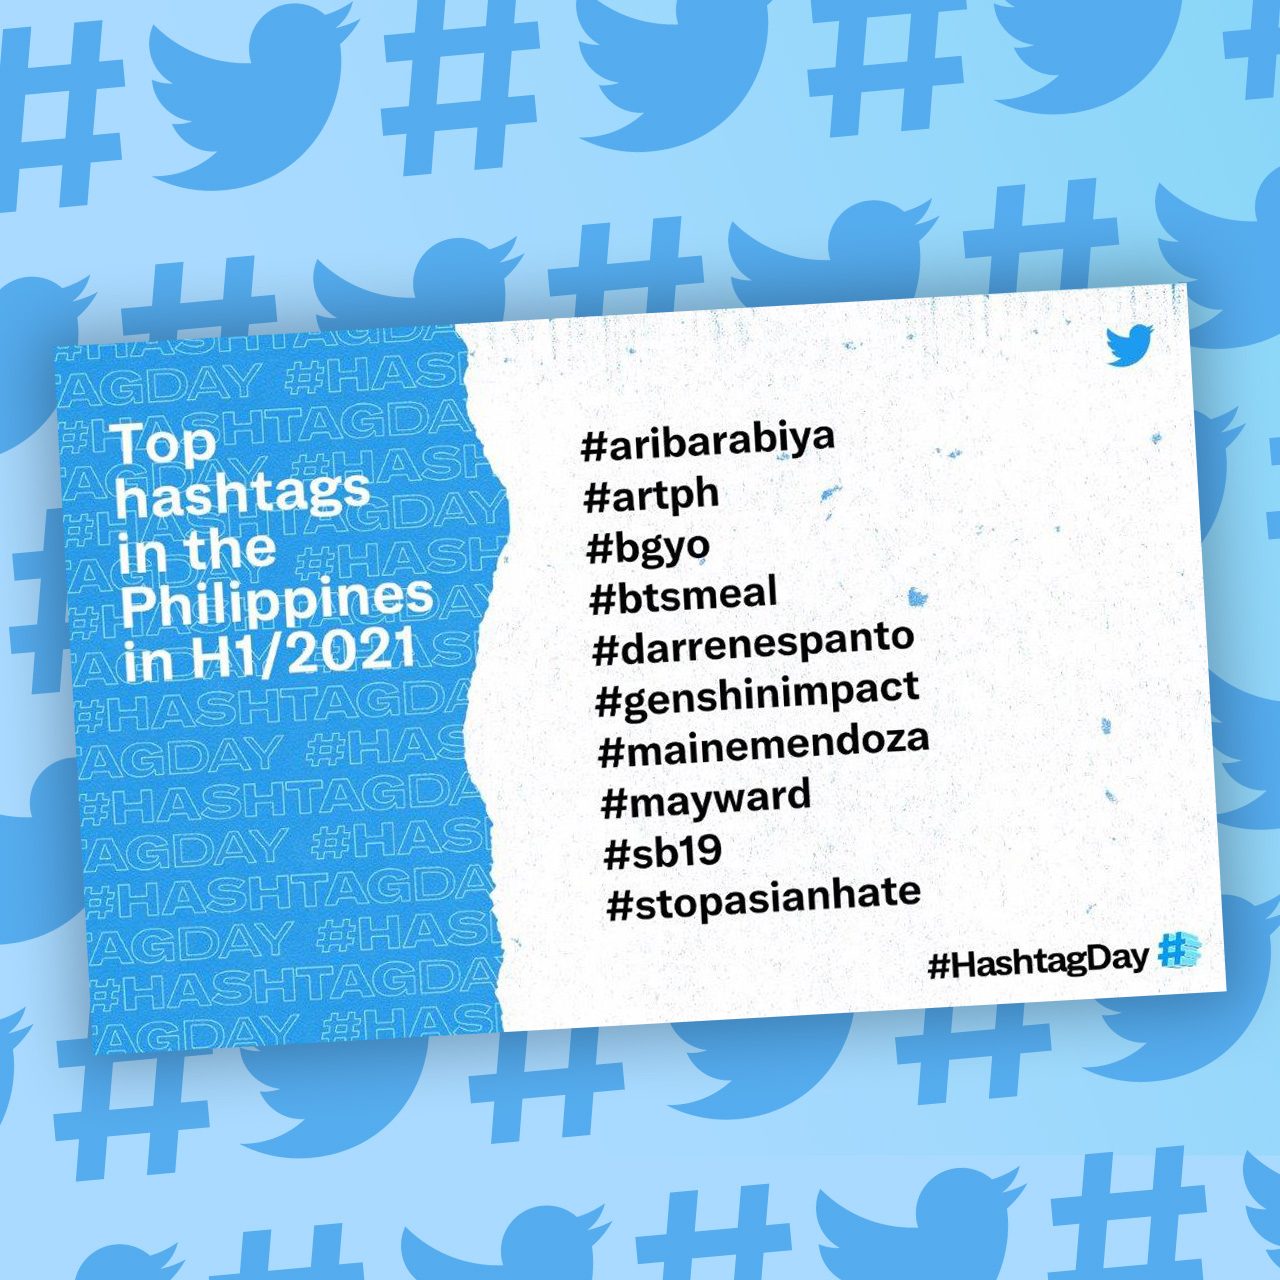 Twitter’s top PH hashtags for the first half of 2021